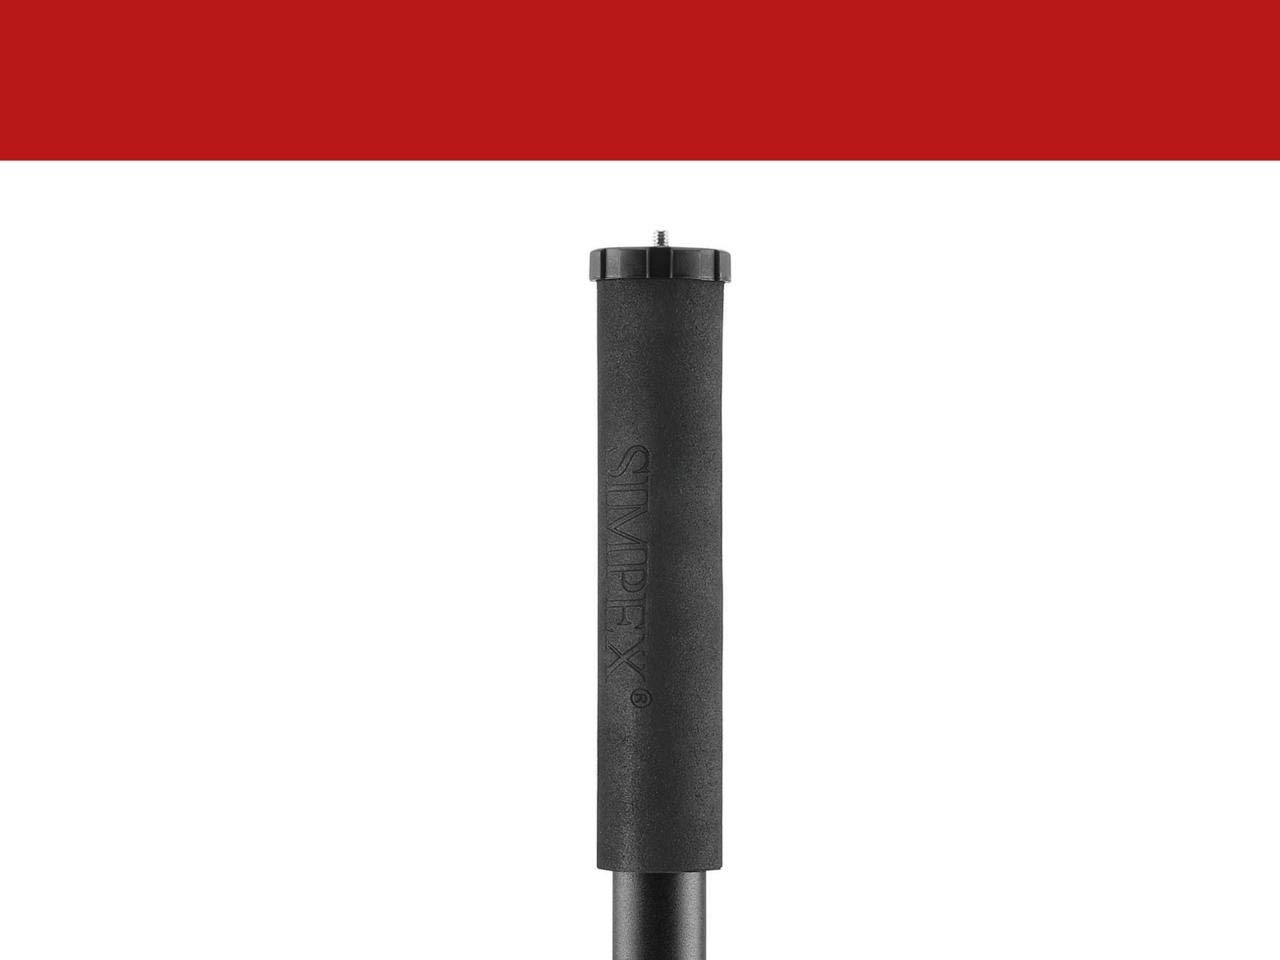 Simpex Professional Monopod 063 Italian Red Locks Design with Pay Load up to 10 kg for Photography and Videography